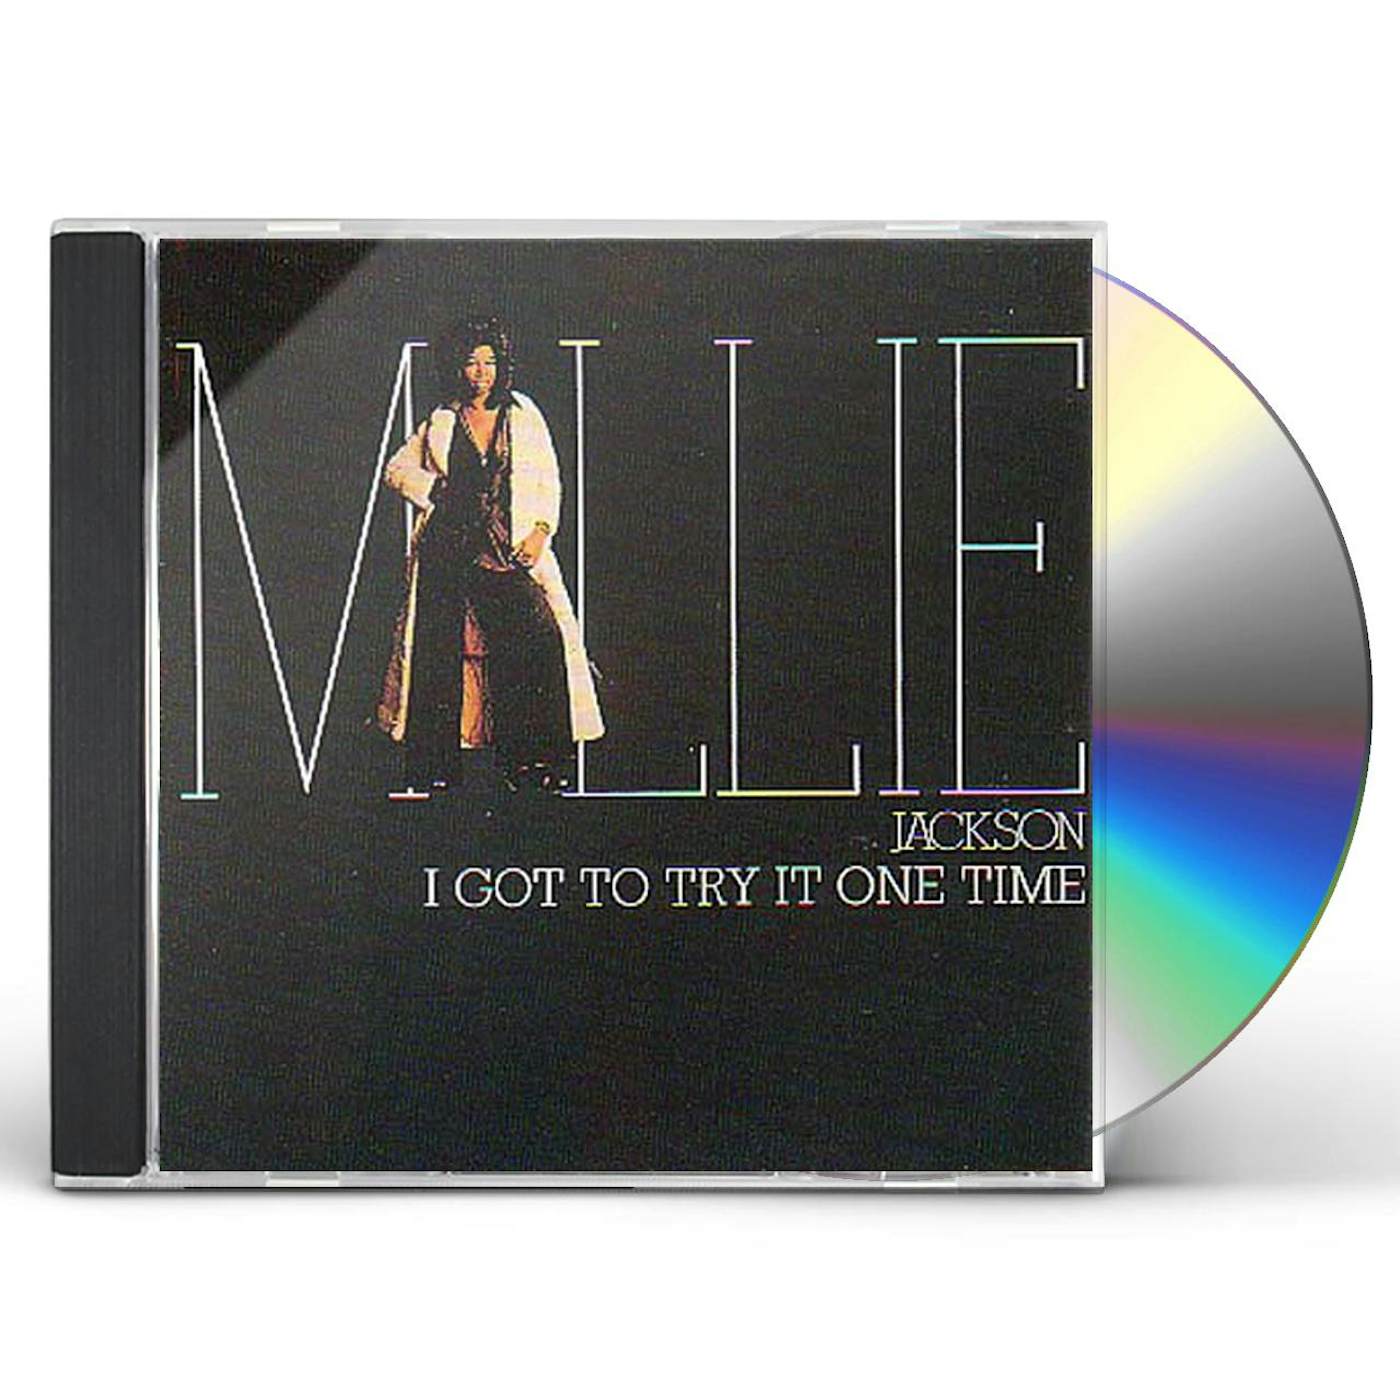 Millie Jackson I GOT TO TRY IT ONE MORE TIME CD